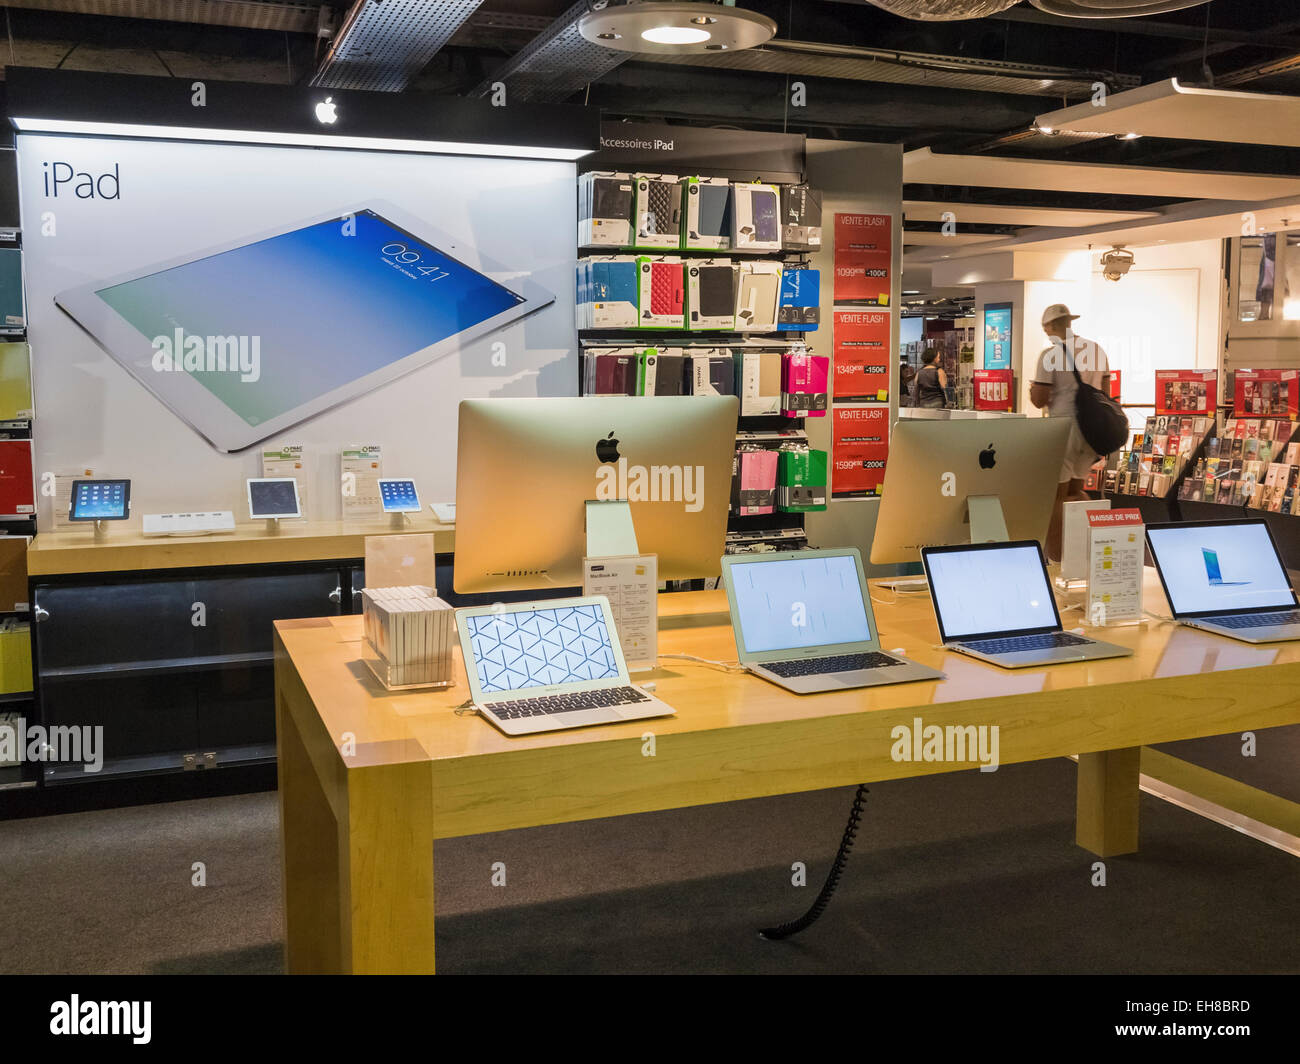 Apple products on display in a department store Stock Photo